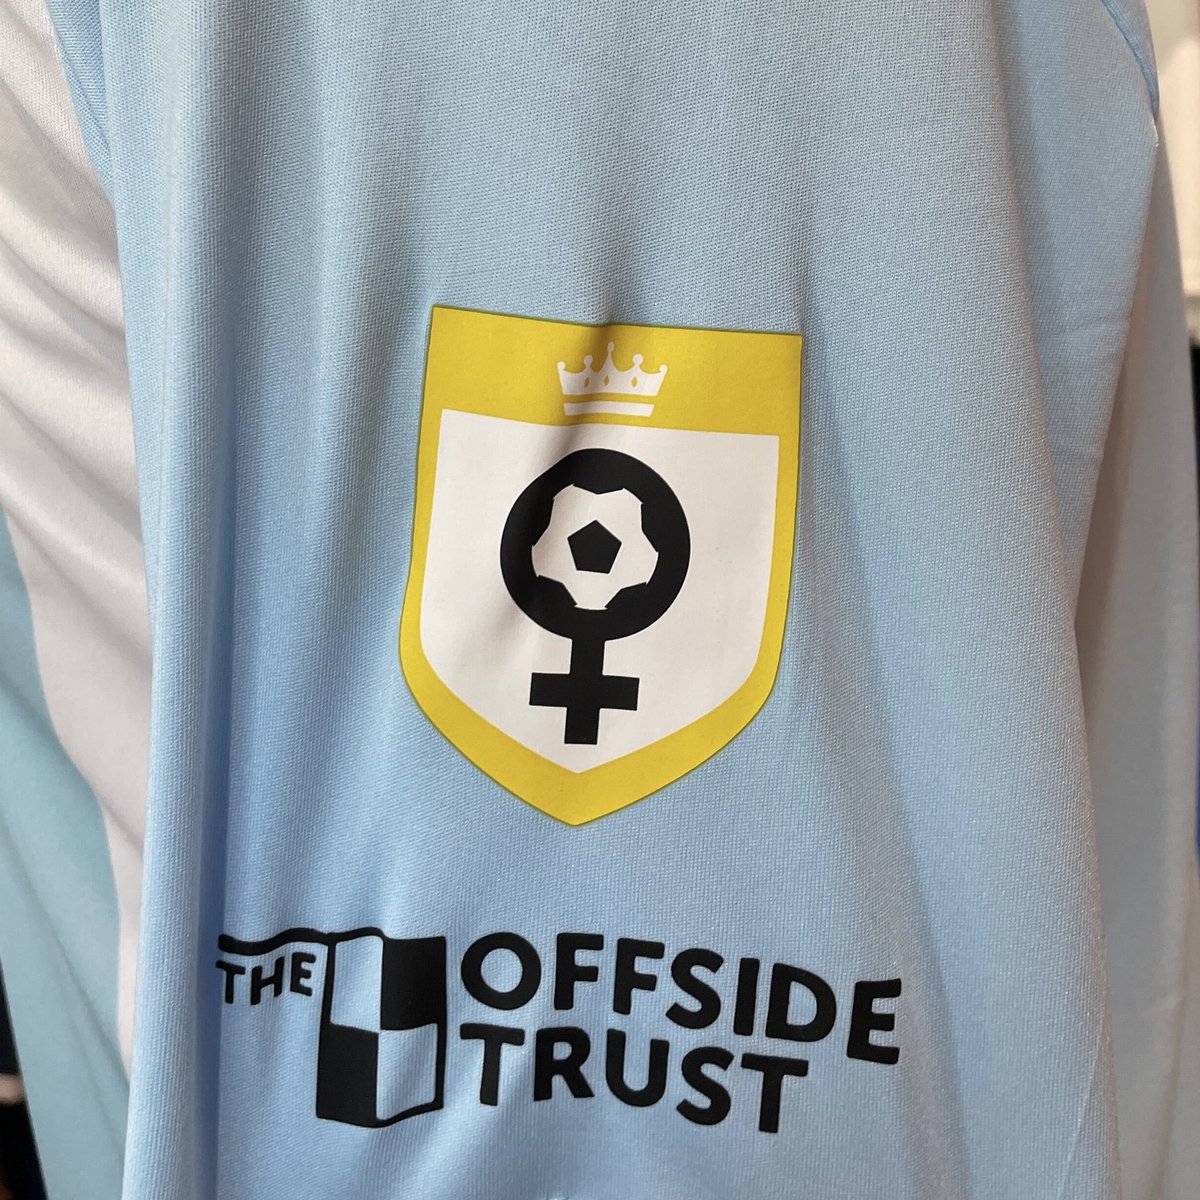 Congratulations @HerGameToo on winning Equality, Diversity & Inclusion Gold Award + Best in Women’s Football Organisation Gold Award at @The_FCAs 2023 🏆 Printing their crest & #HerGameToo on kits like @northwalshamtfc & @TSAFC_WG is a pleasure! #99Kits #YourUltimateKitPartner